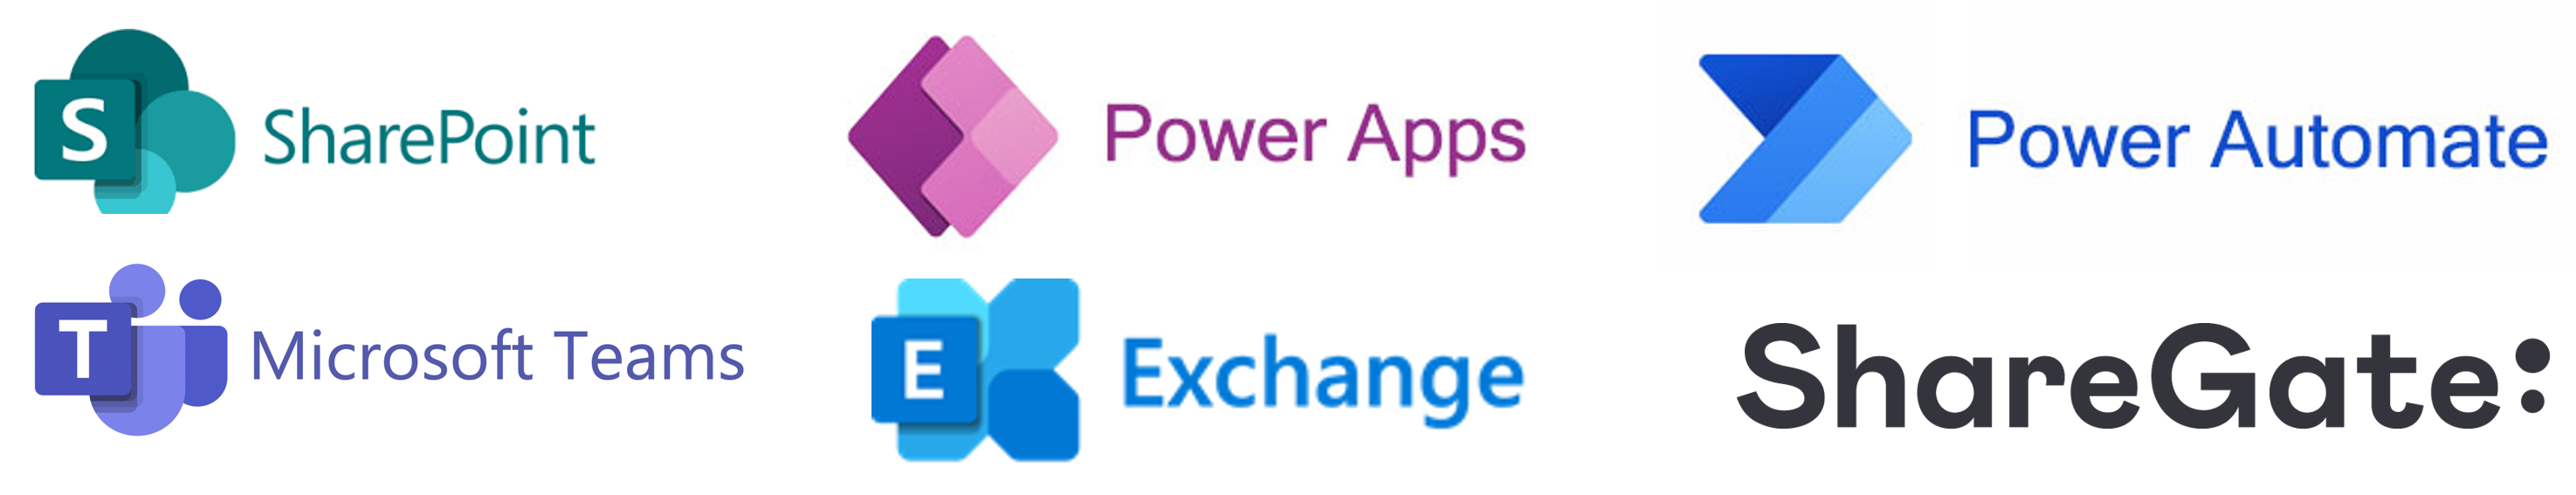 SharePoint、Power Automate、Power Apps、Exchange、Microsoft Teams、ShareGate